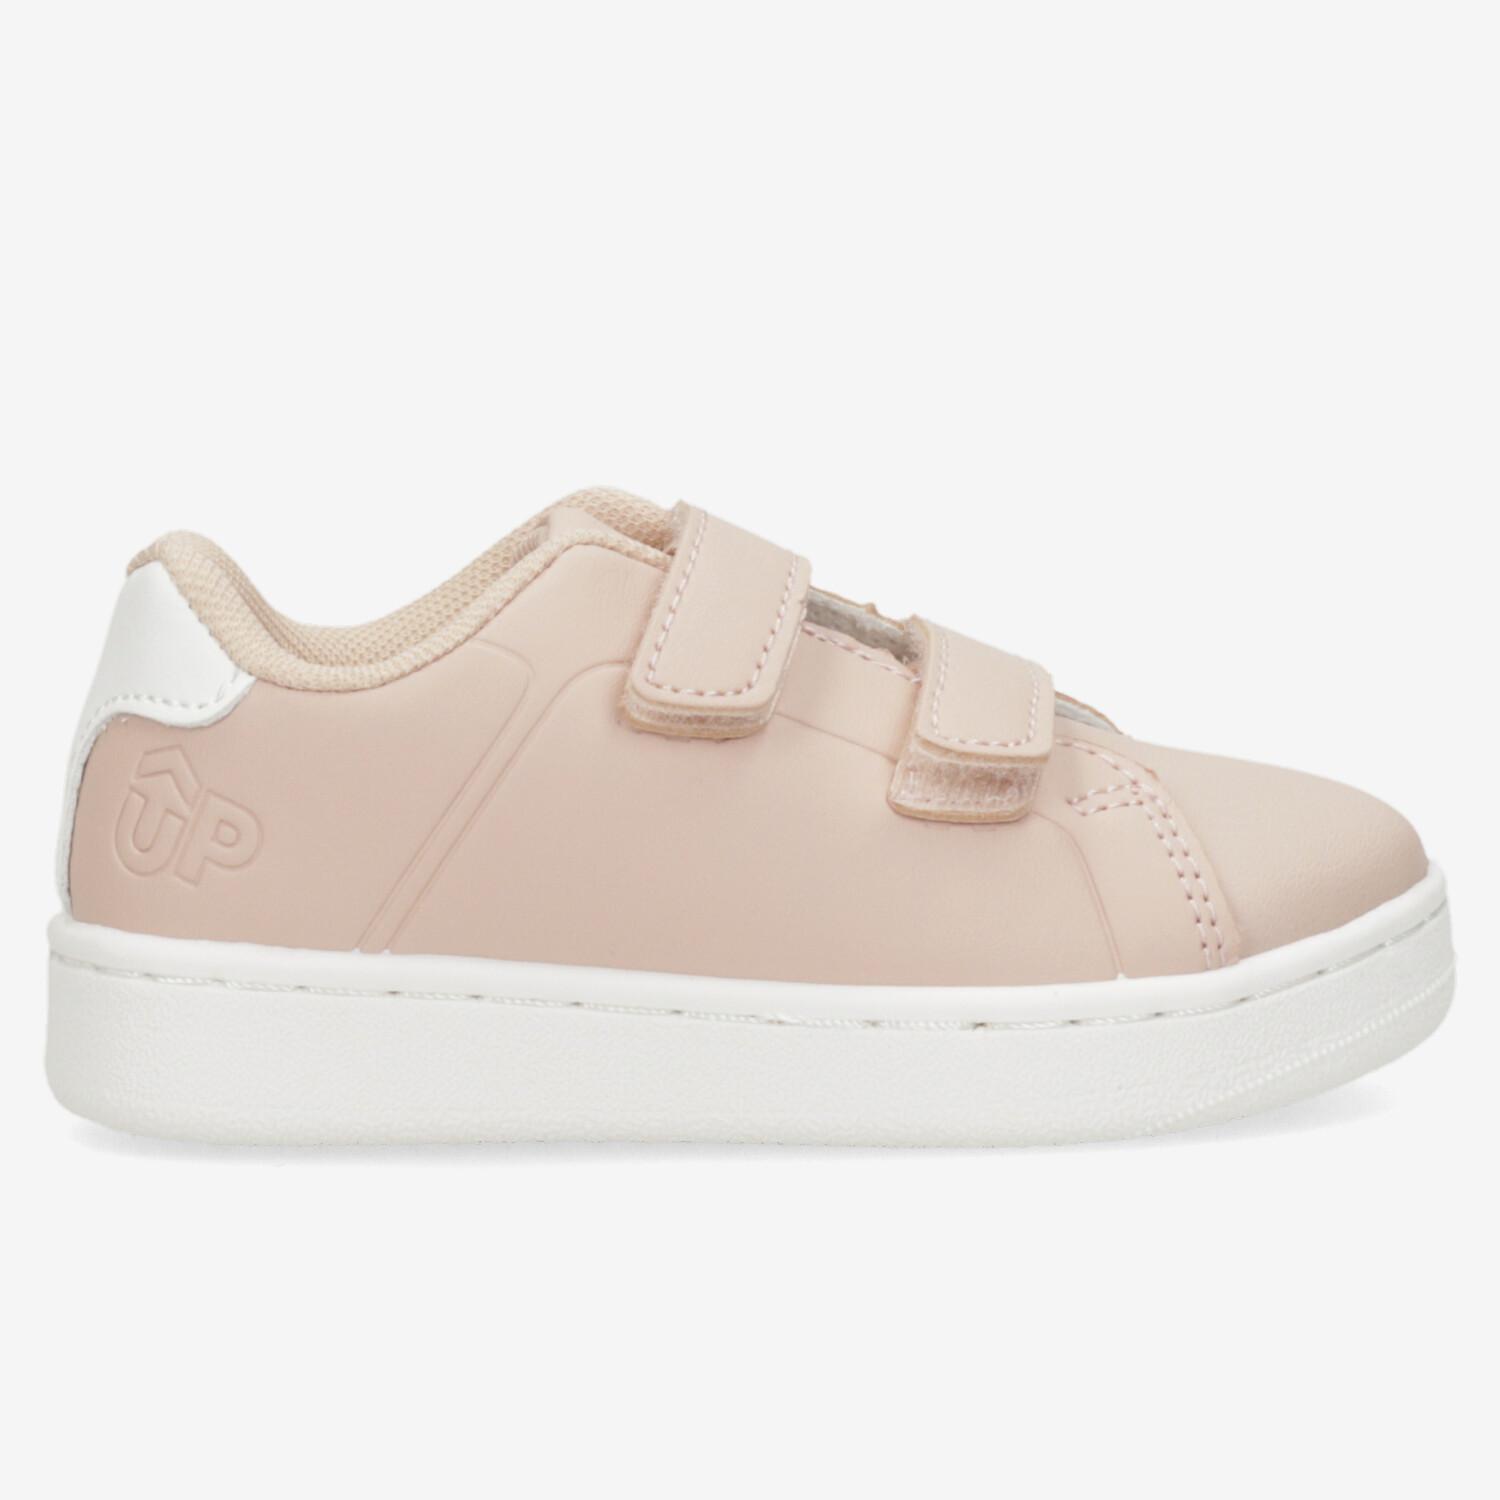 Up Arena - Rose - Chaussures Velcro Fille sports taille 25